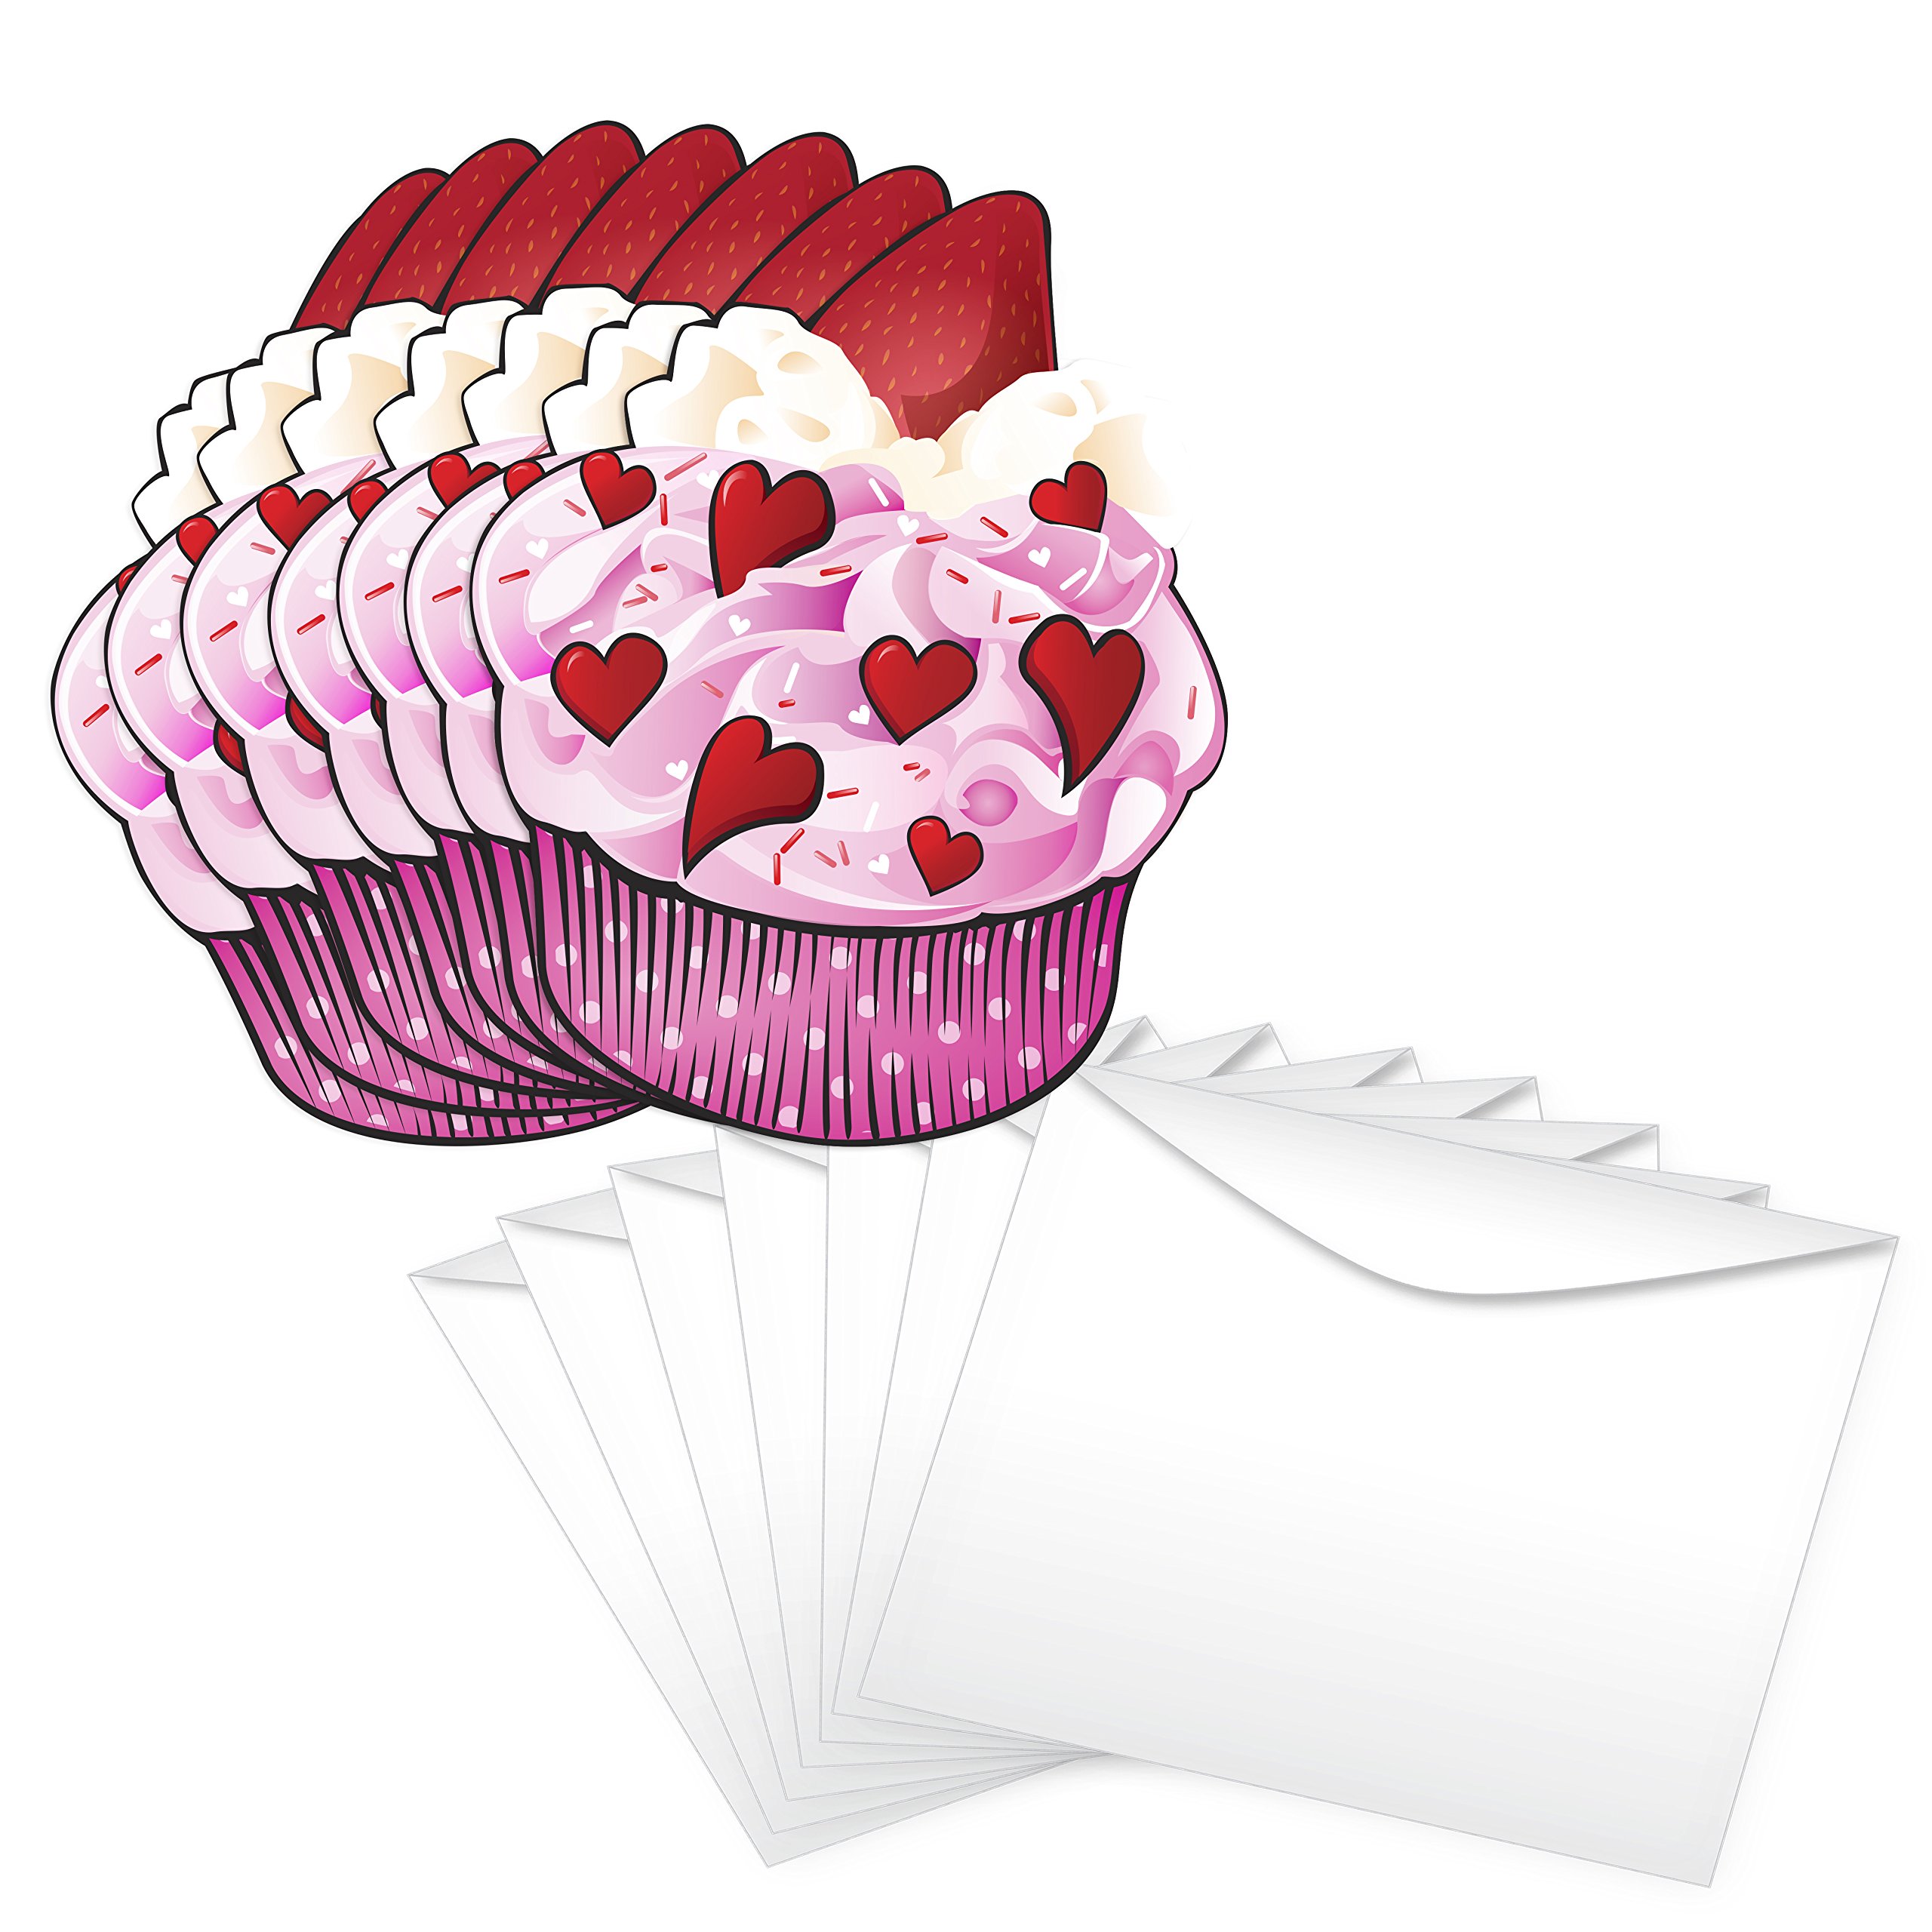 28-Pack Strawberry & Cherry Valentines Day Cards with Envelopes I Scratch & Sniff Valentines Day Cards for Kids School I Valentines Day Gifts for Kids Party Favor I Valentines Cards for Kids Classroom